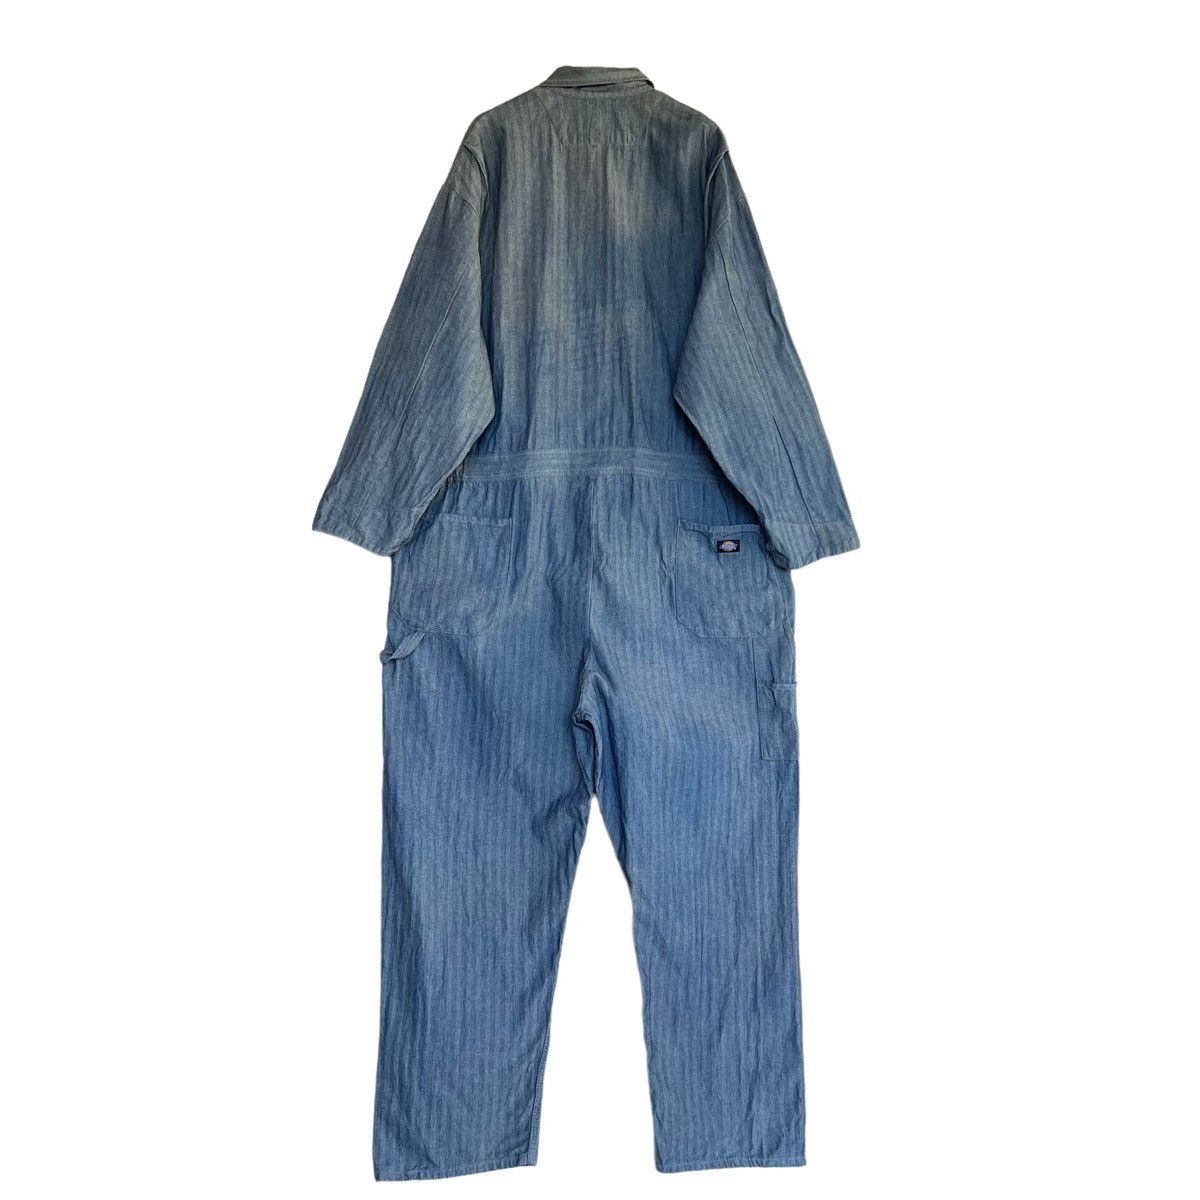 🔥Best Offer🔥 Vintage 90s Dickies Coverall - 8